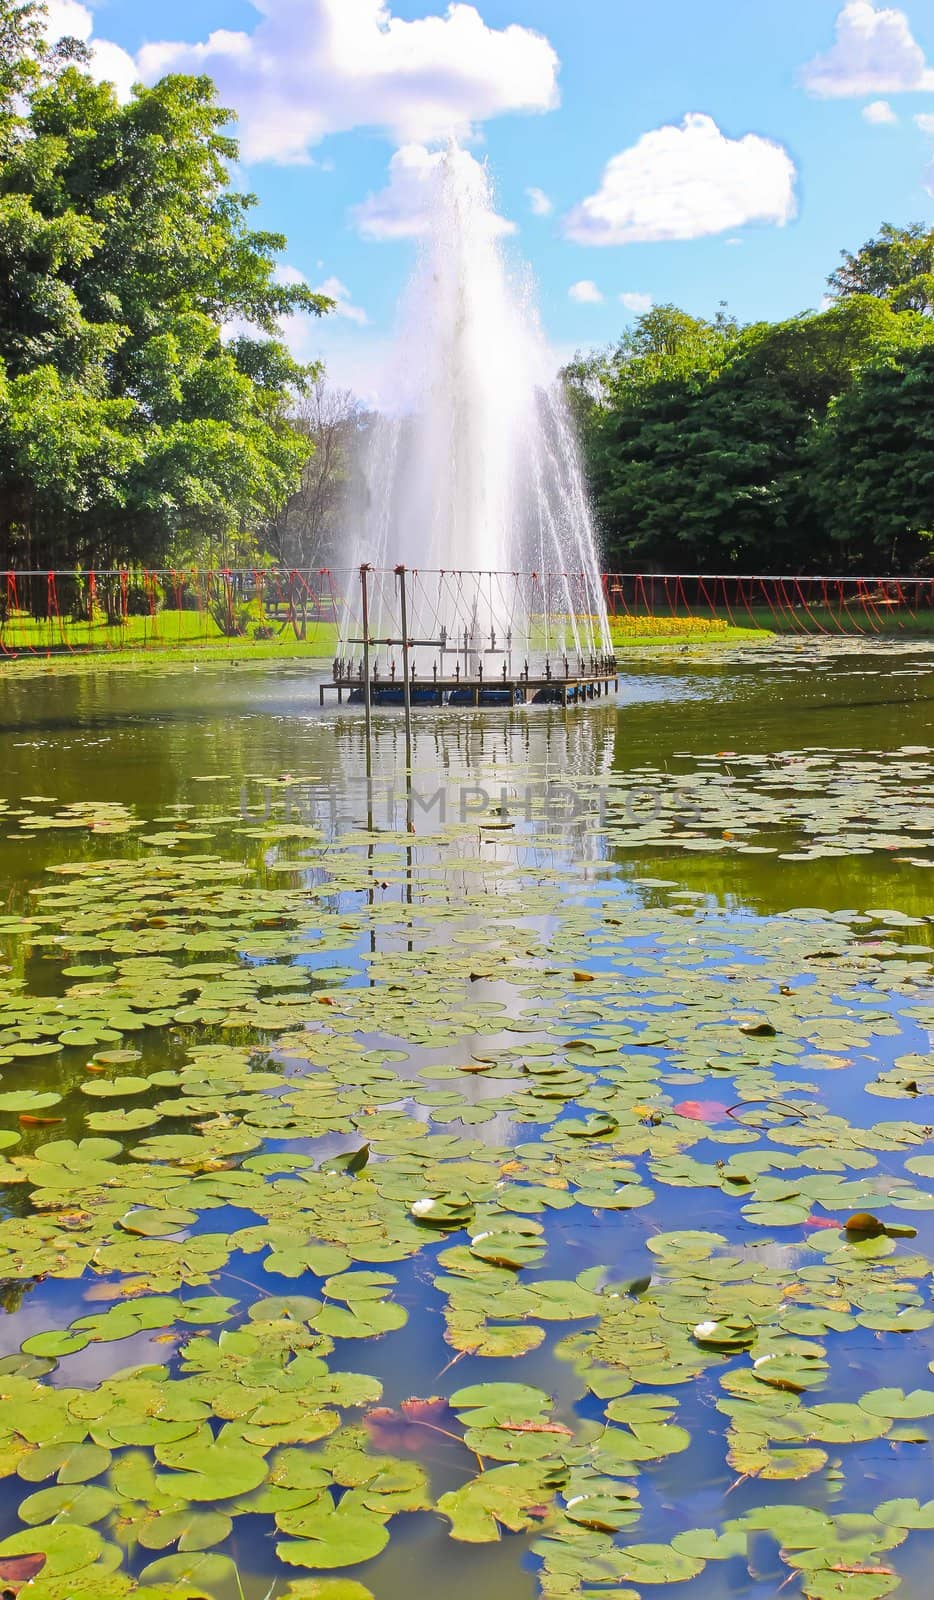 Lotus ponds and fountains in the park